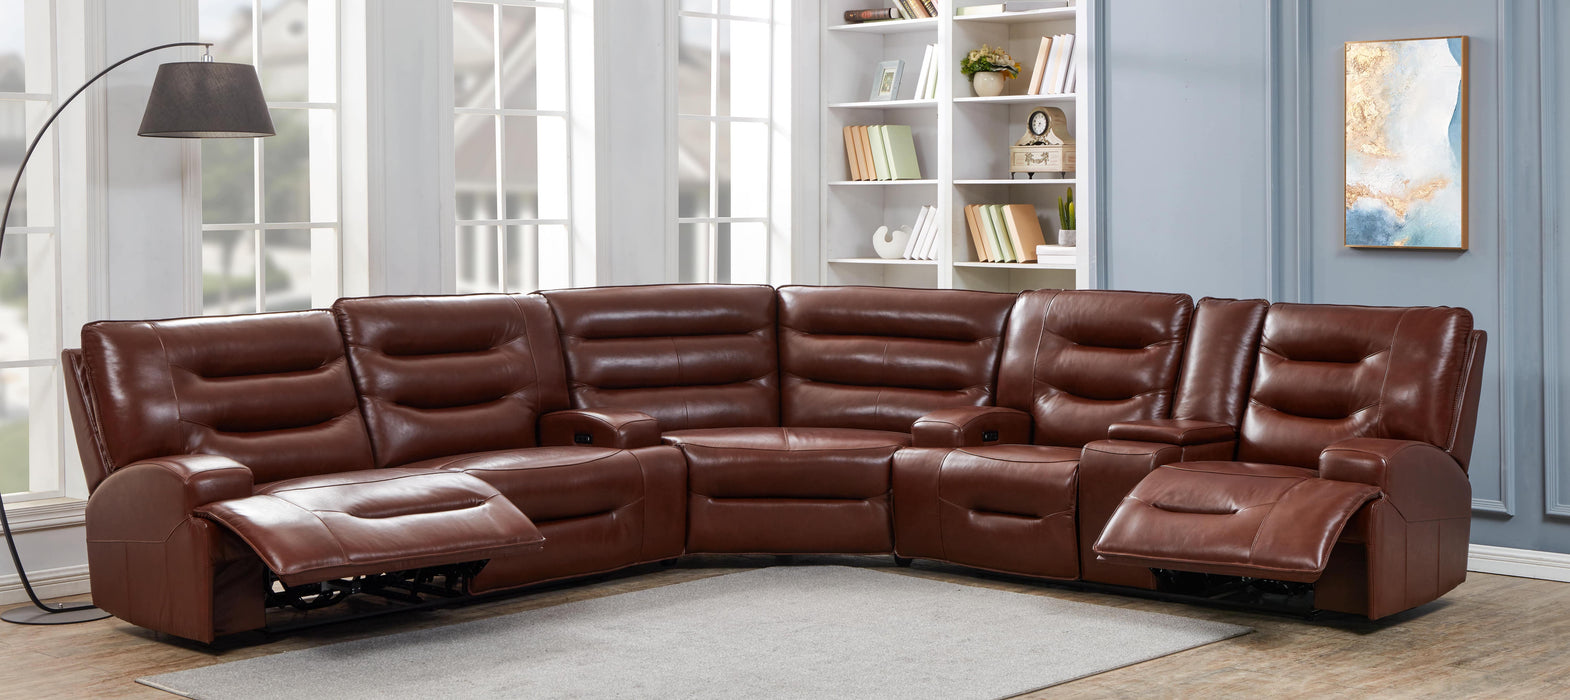 McElroy II Power Reclining Leather Sectional